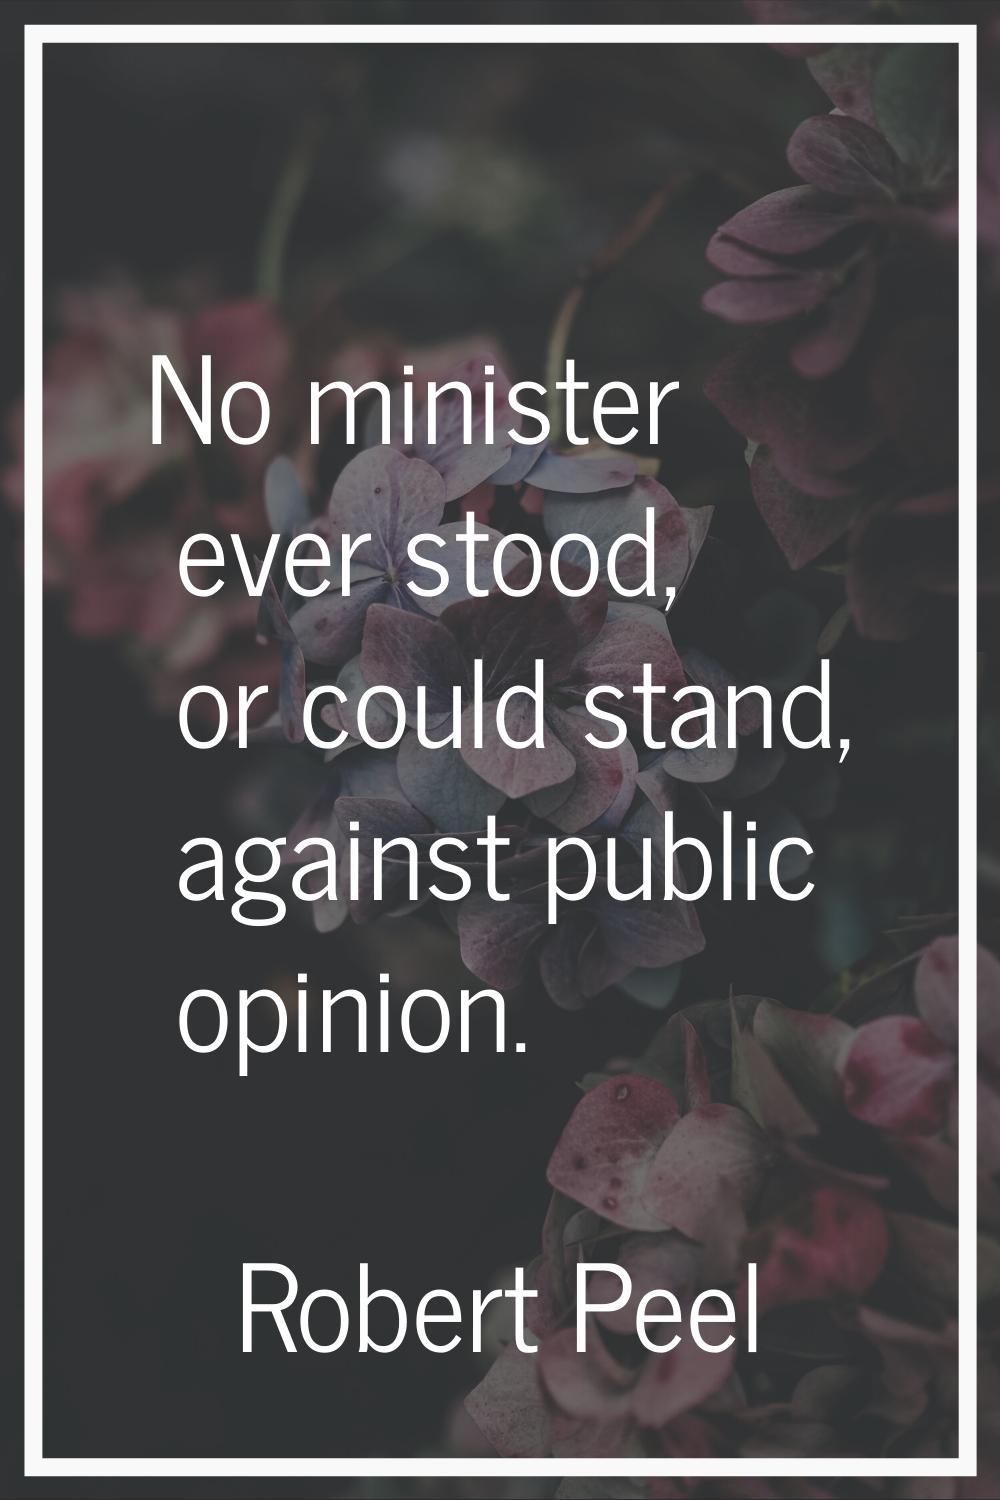 No minister ever stood, or could stand, against public opinion.